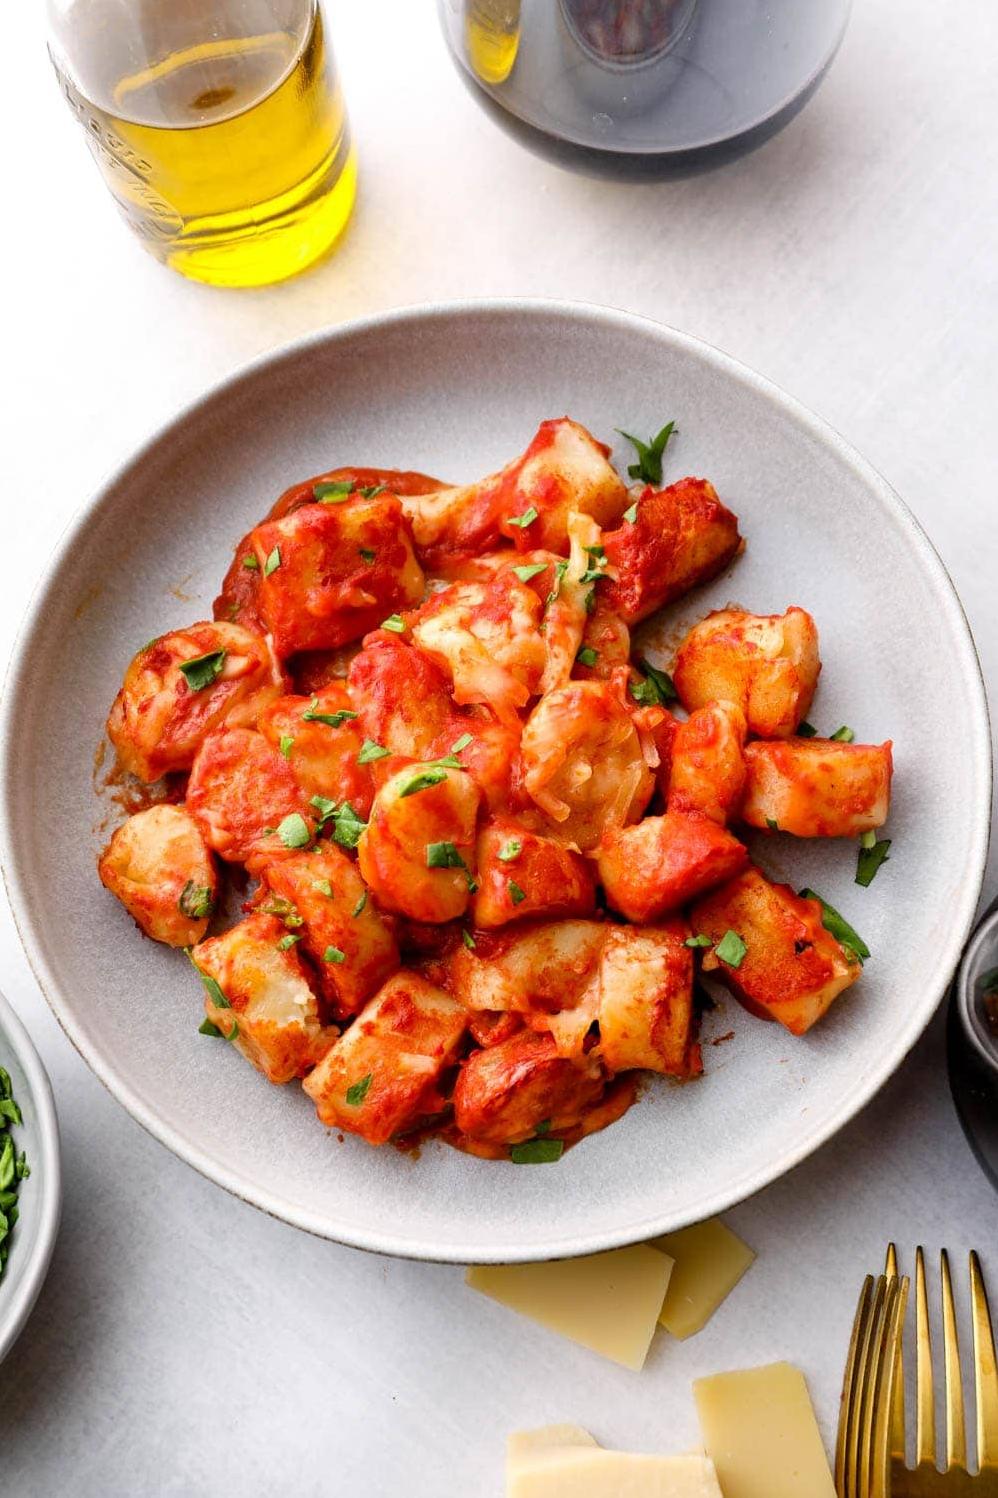  A warm plate of comforting gnocchi goodness is just a few steps away.